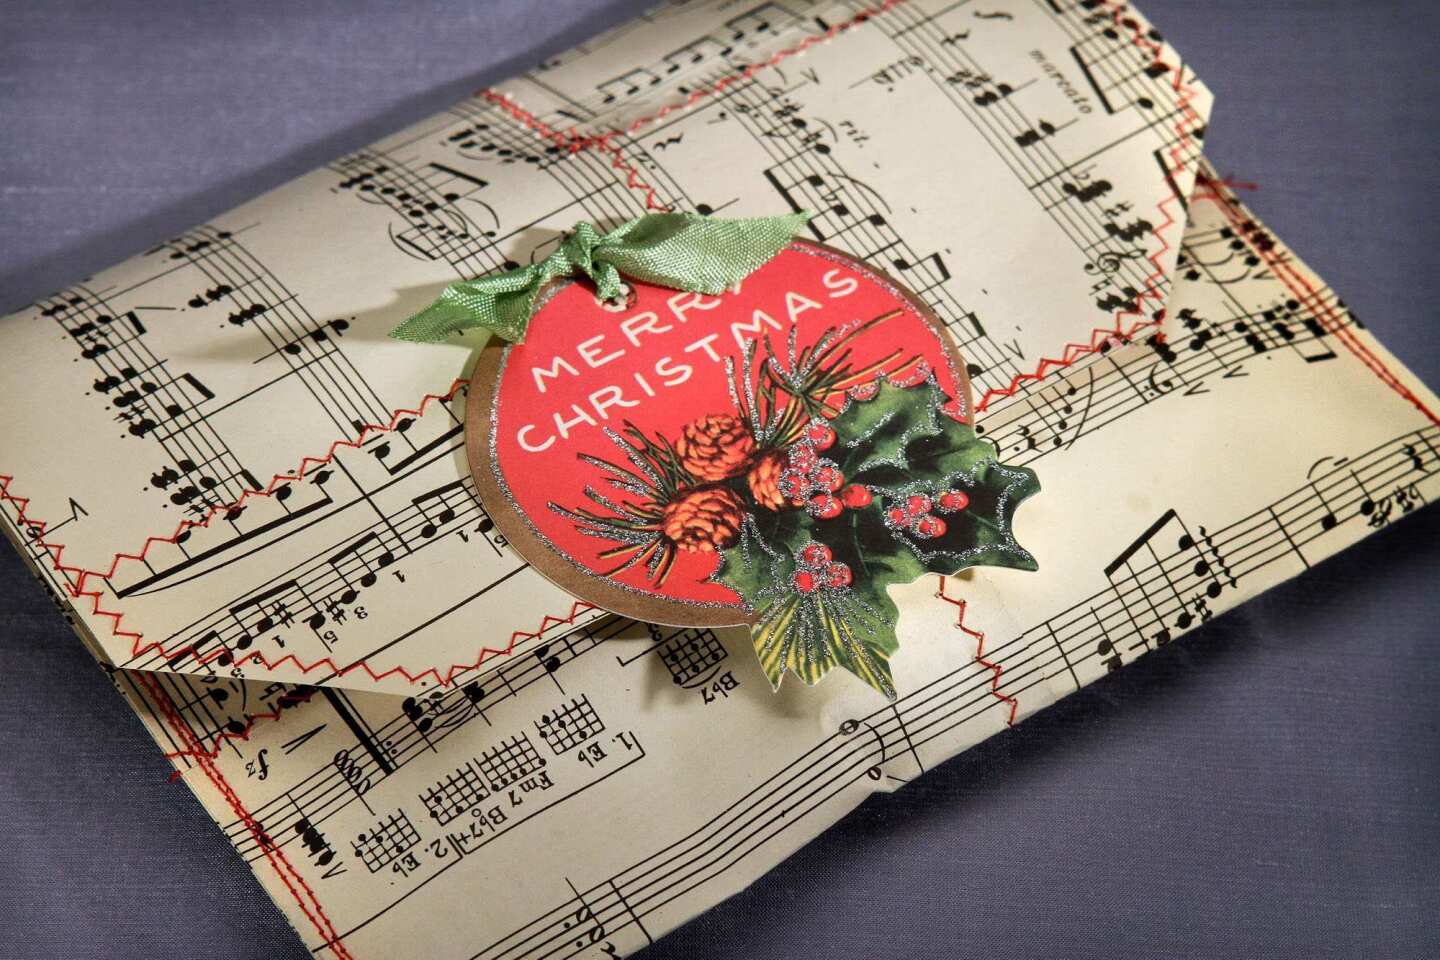 Vintage sheet music is cut and sewn patchwork-style into an envelope shape, just right for delivering a single cookie.